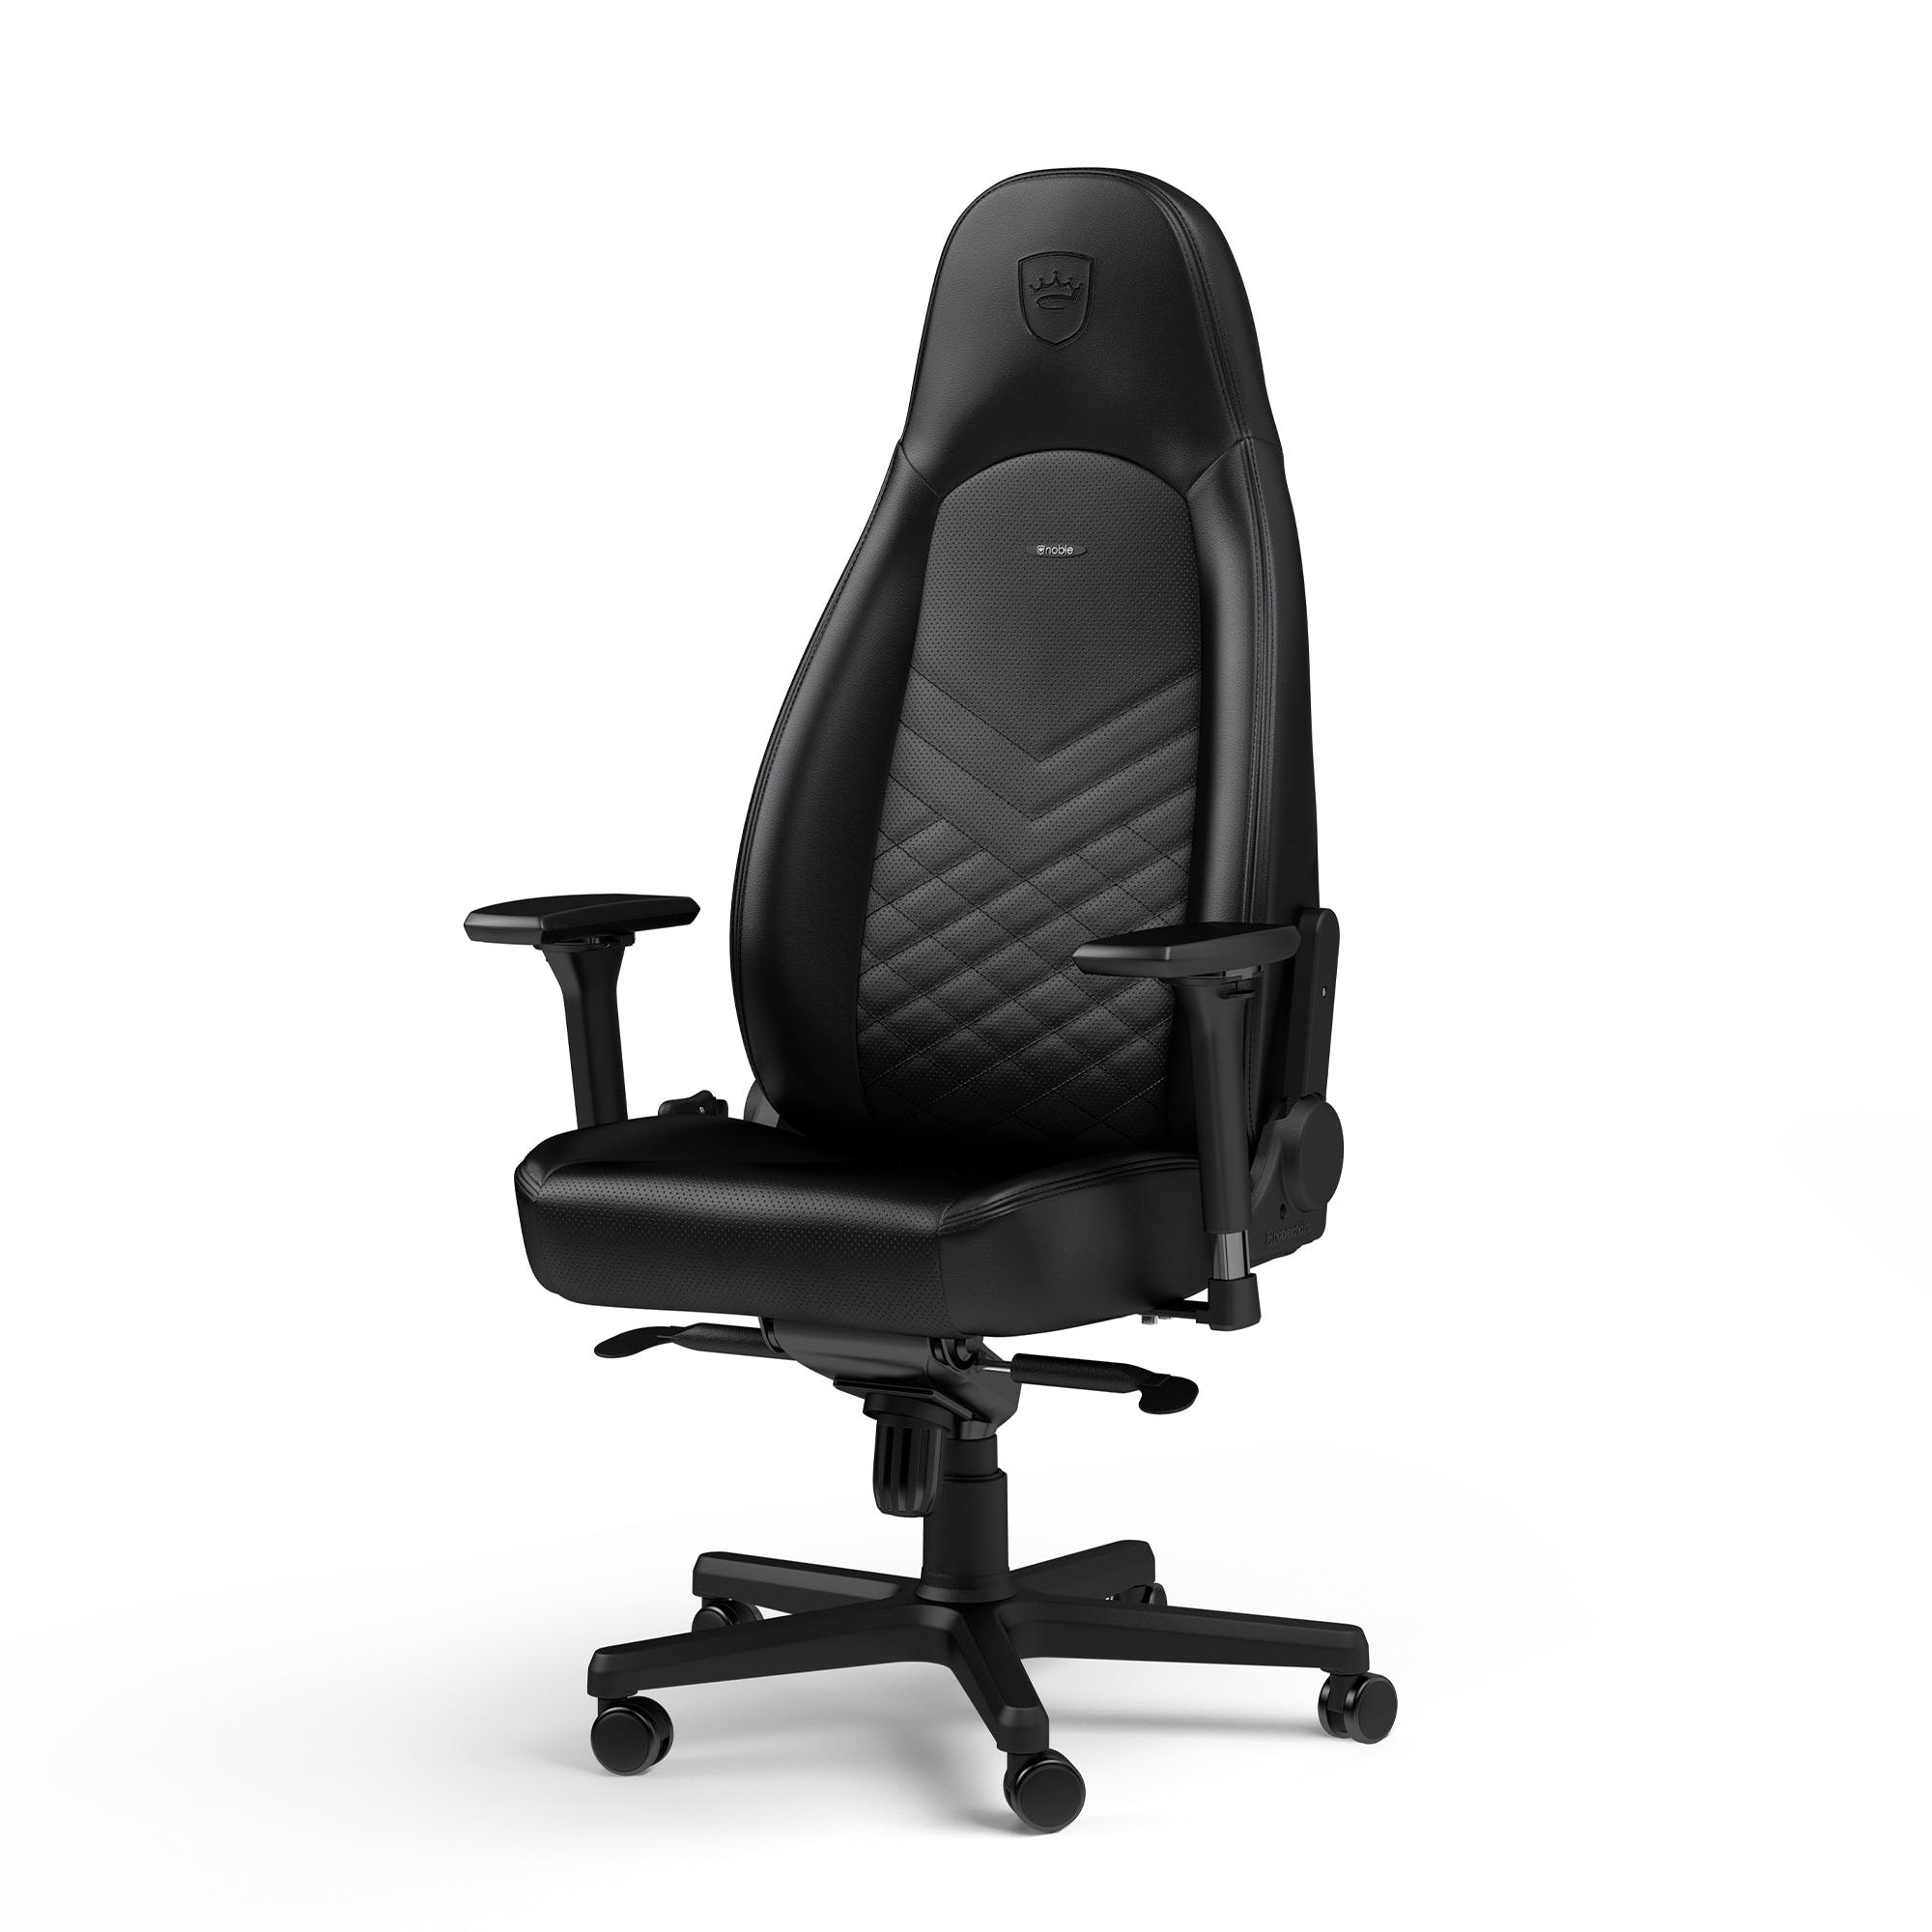 noblechairs ICON Gaming Chair - Black